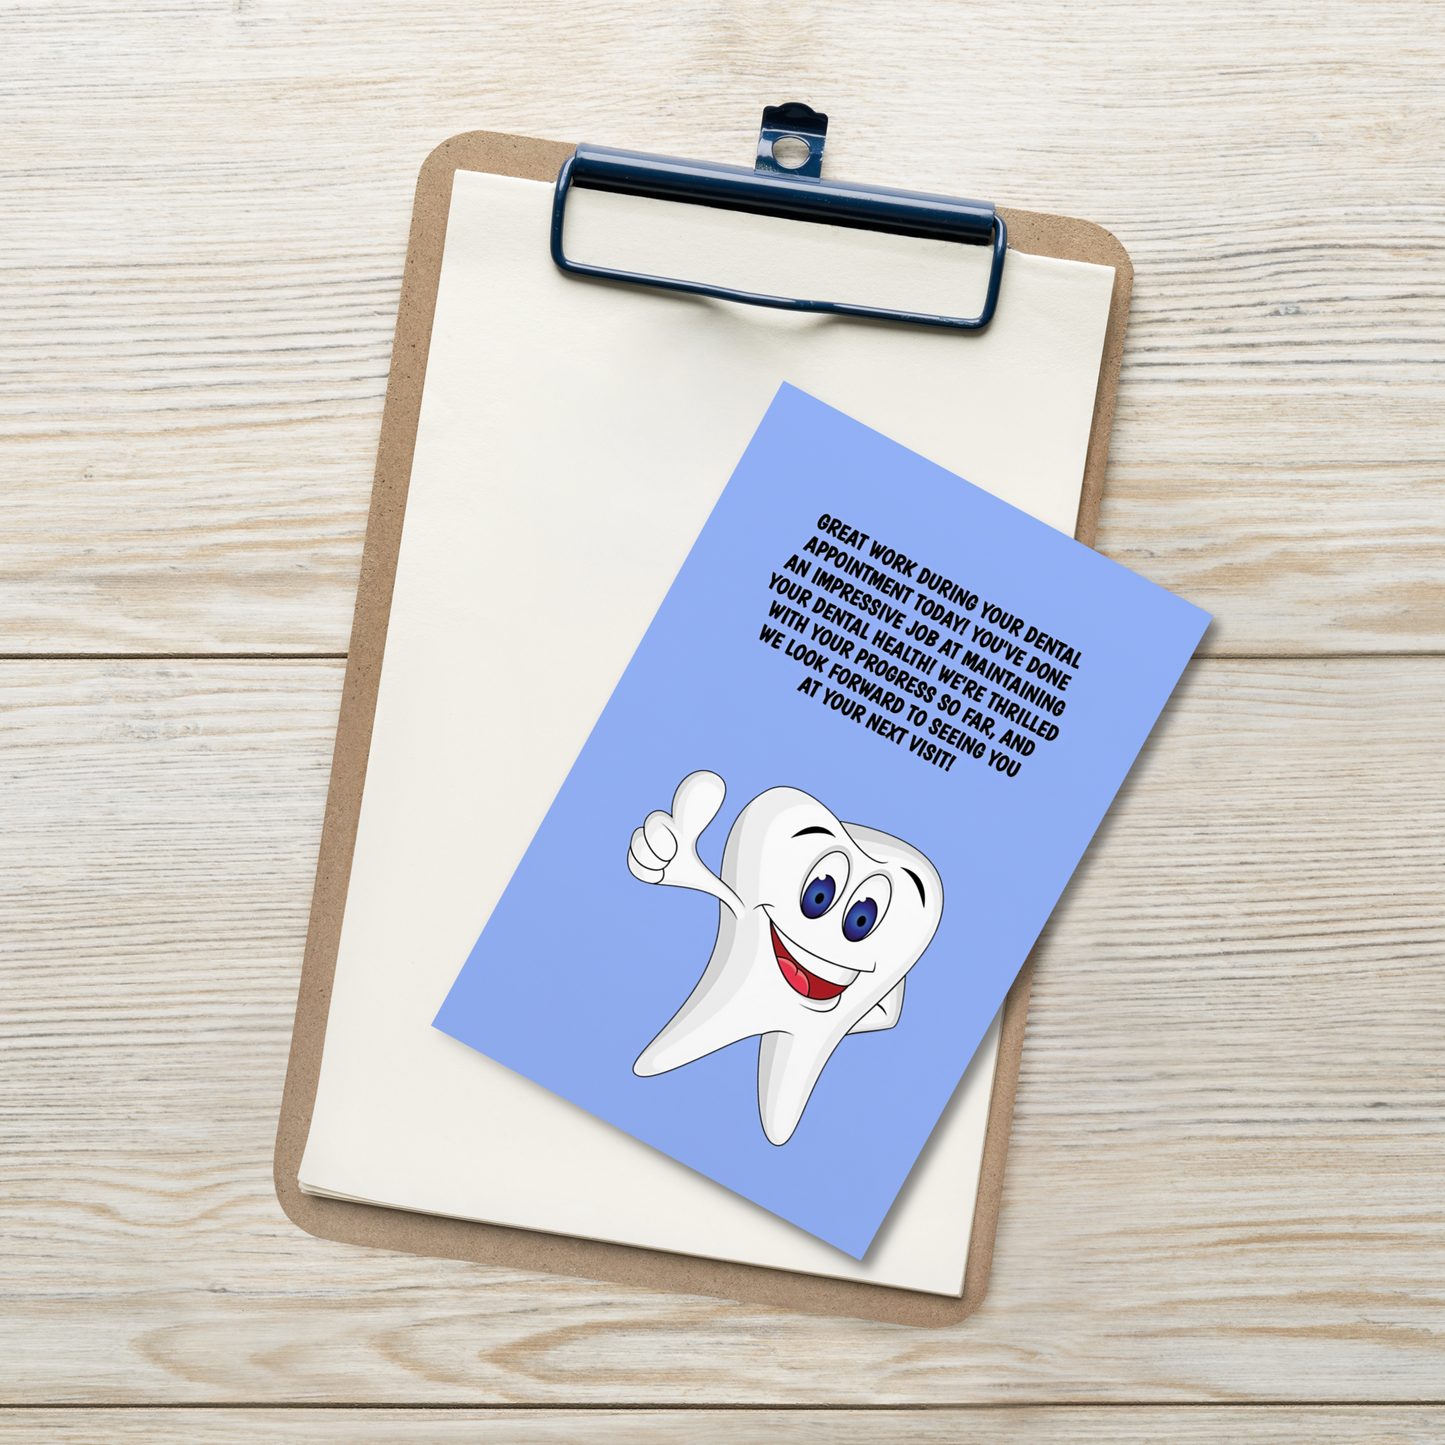 Dental Motivational & Reward Cards- Excellent Work During Your Dental Appointment Today! You've Done An Impressive Job Maintaining Your Dental Health!